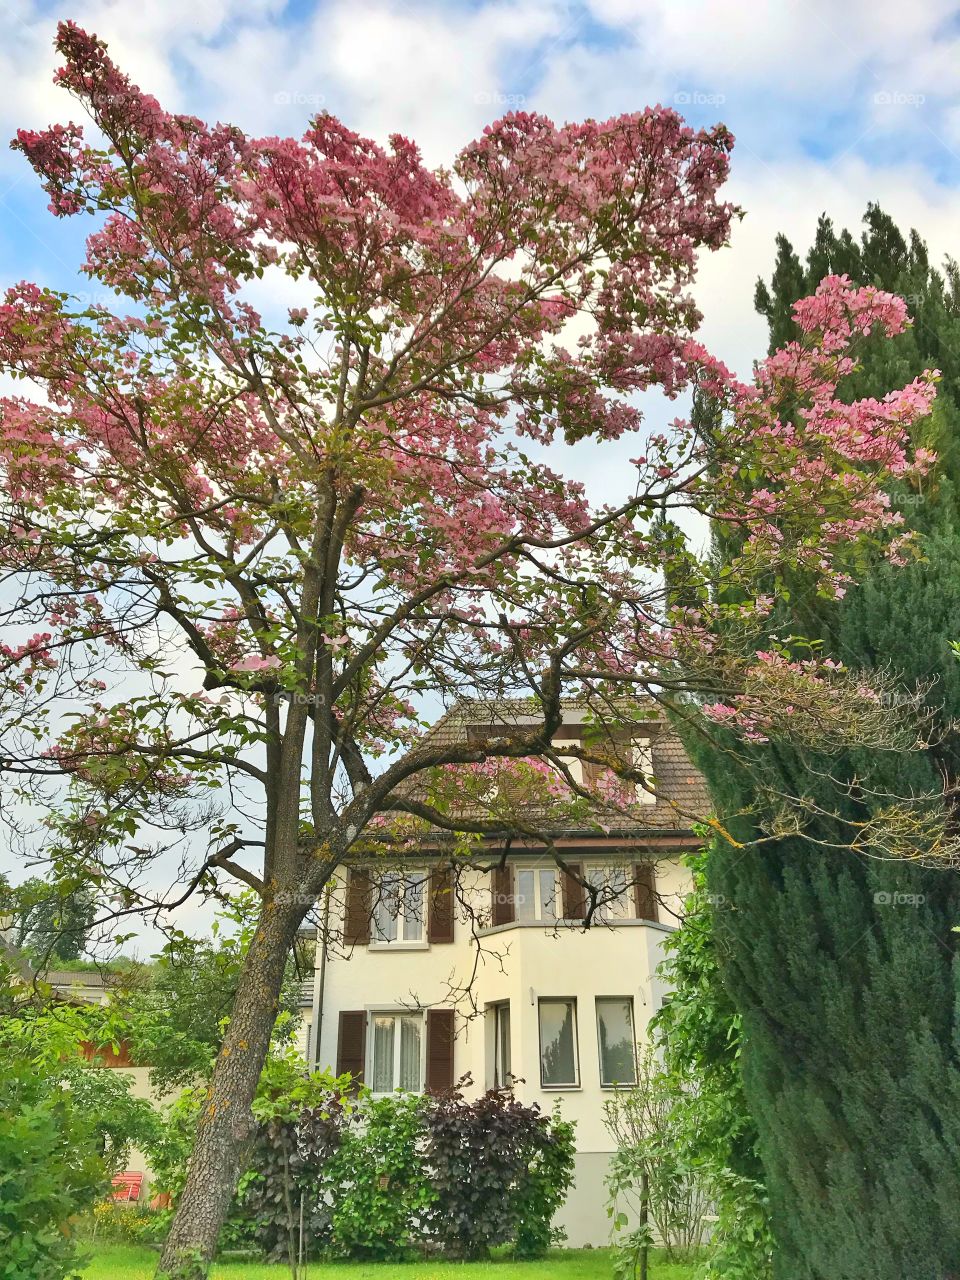 Pink flowering tree in front of a house in Switzerland 